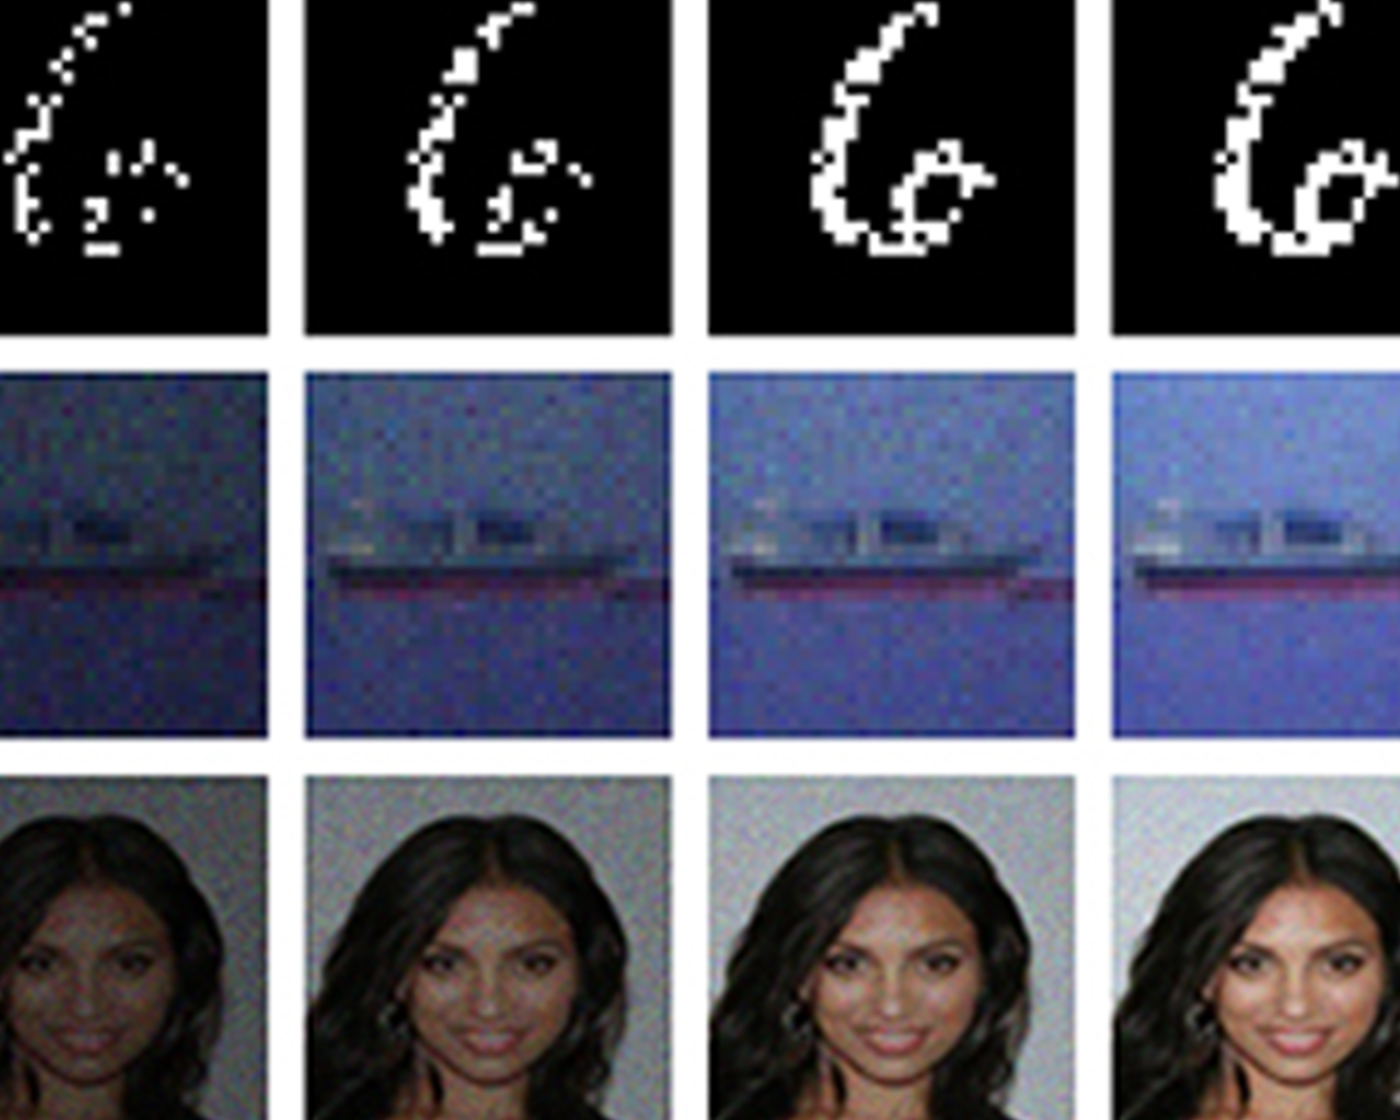 AI breakthrough creates images from nothing